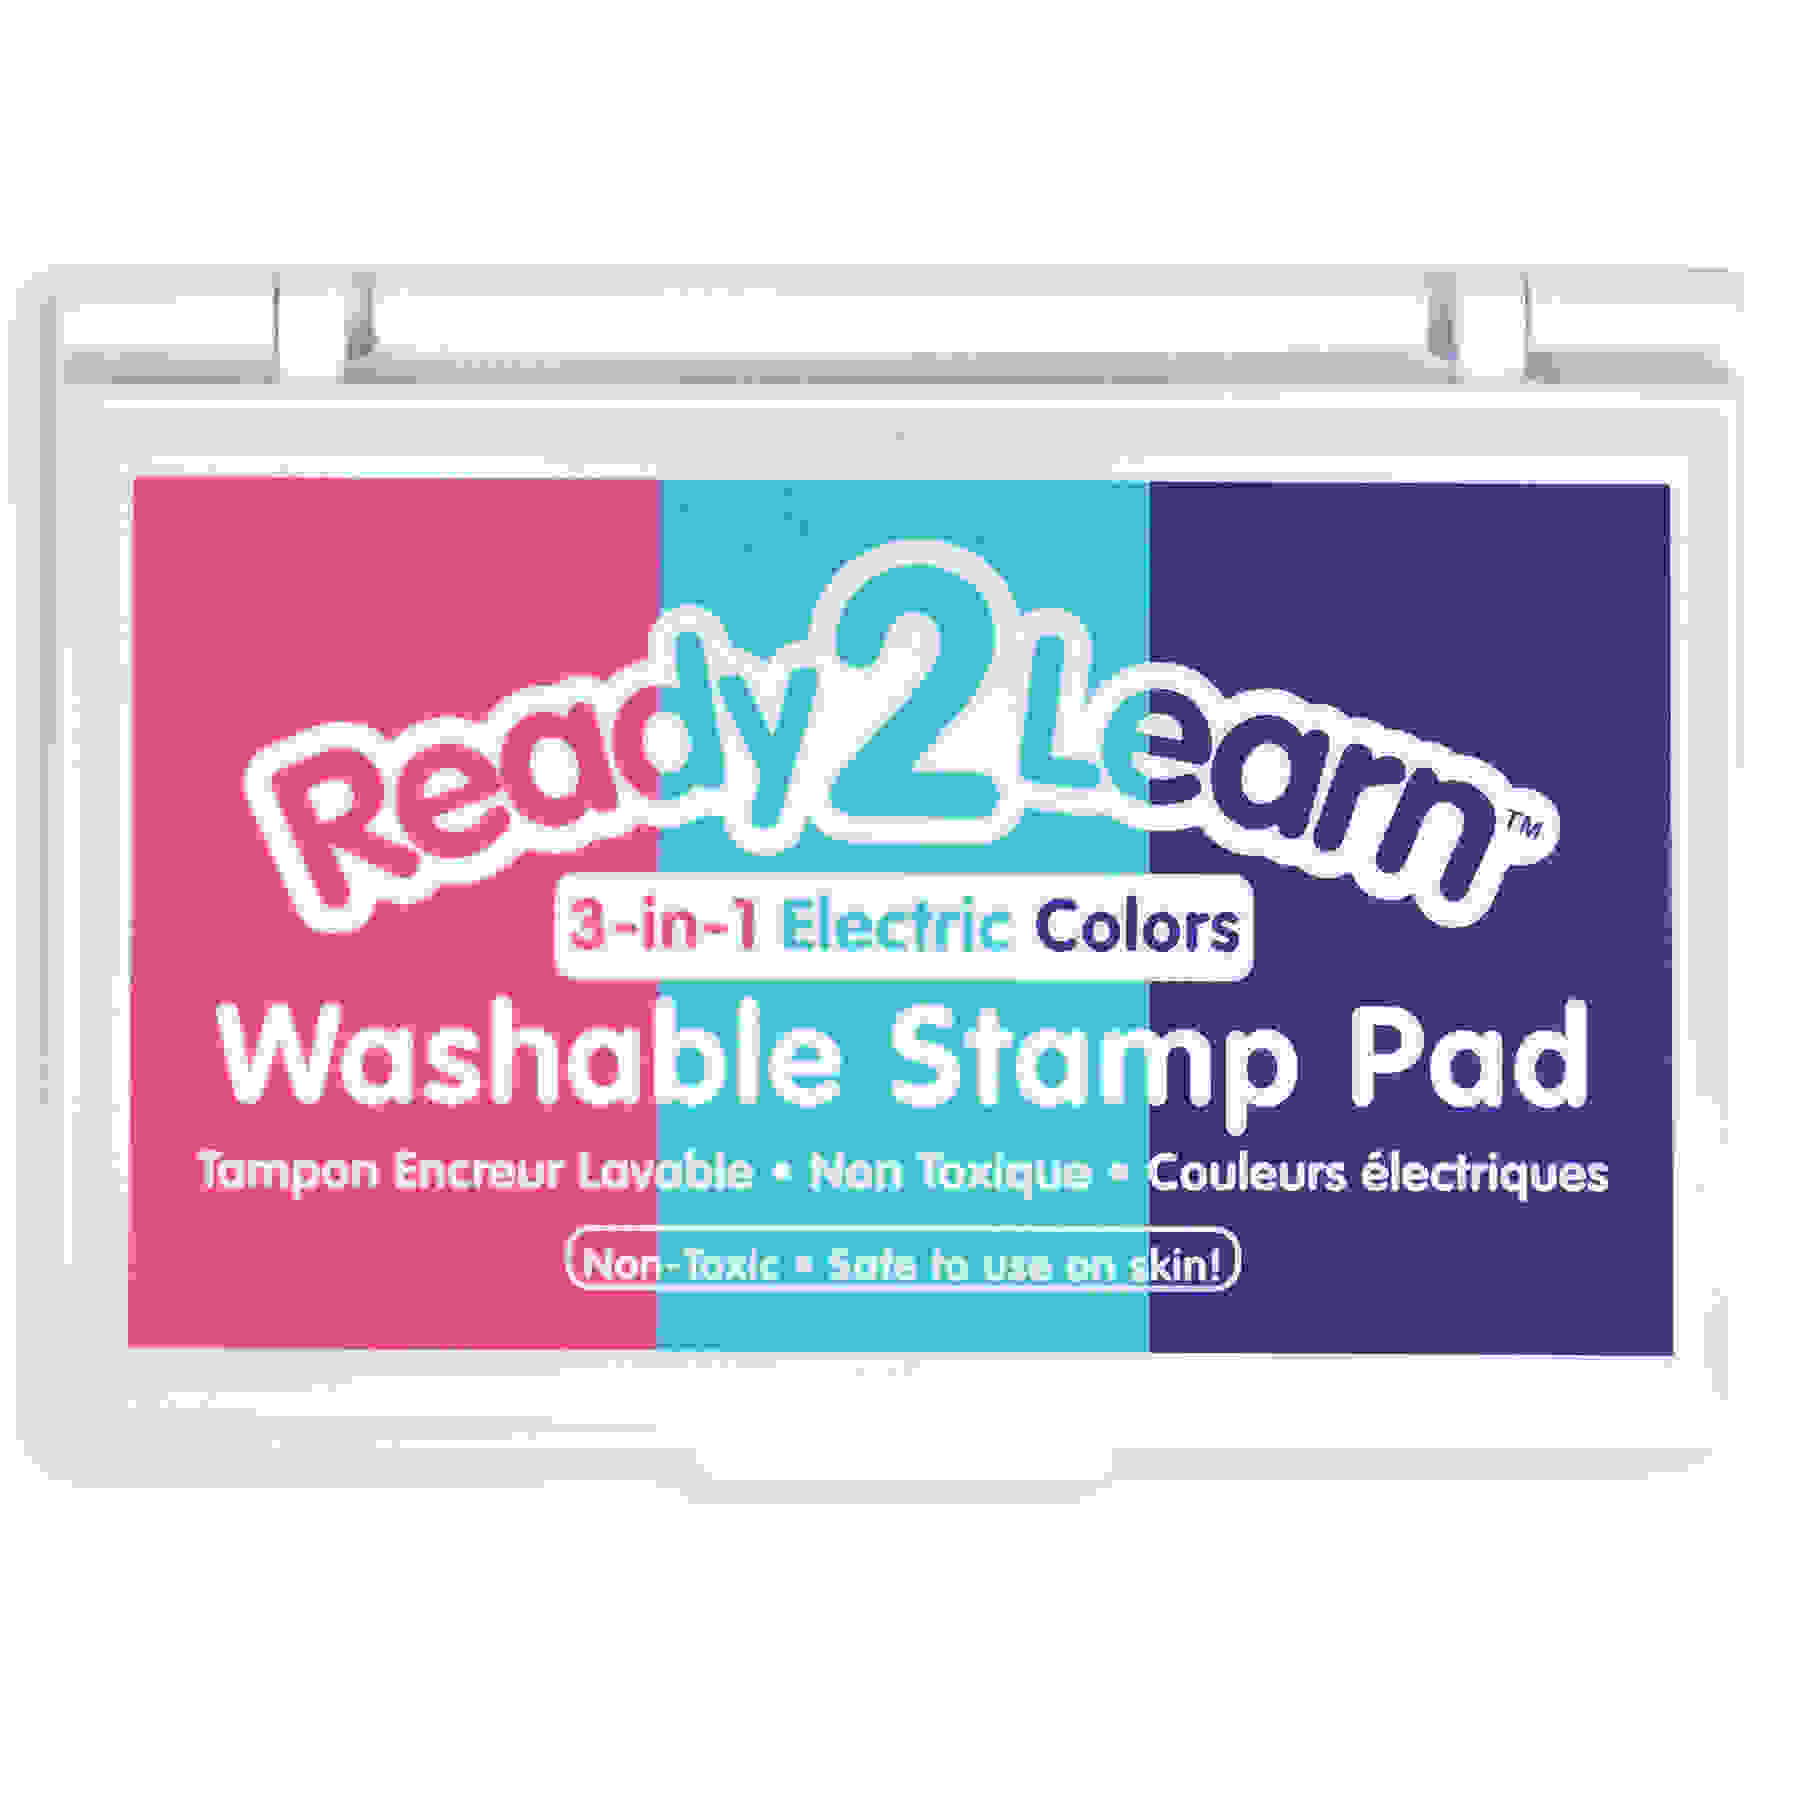 Washable Stamp Pad - 3-in-1 Electric Colors